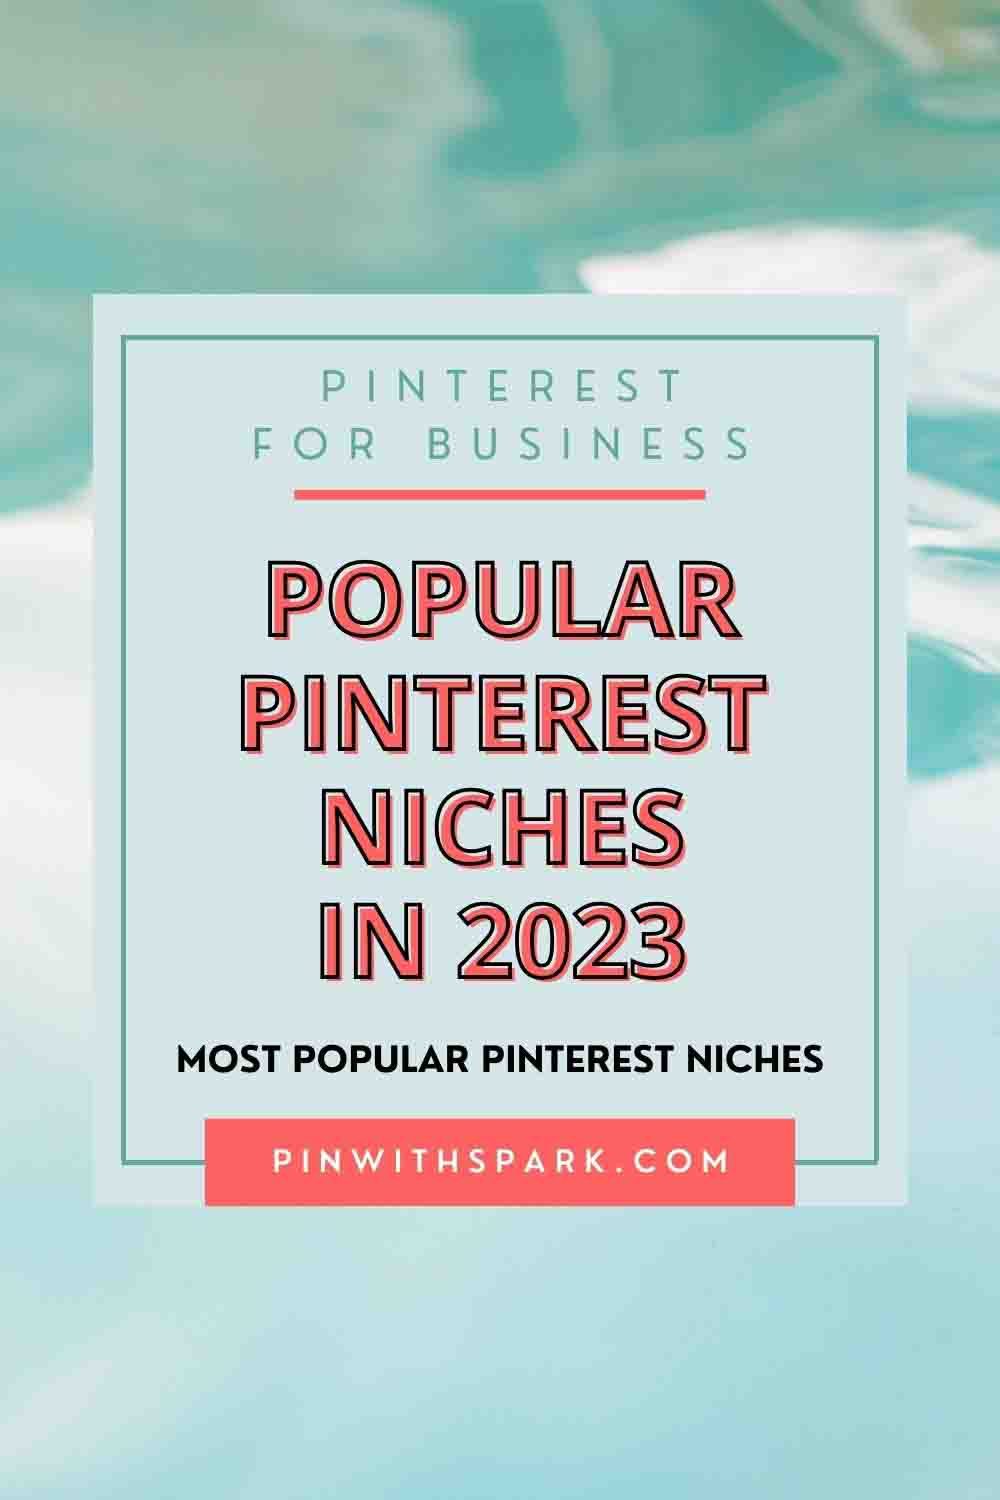 Most popular Pinterest niches text overlay pinwithspark.com